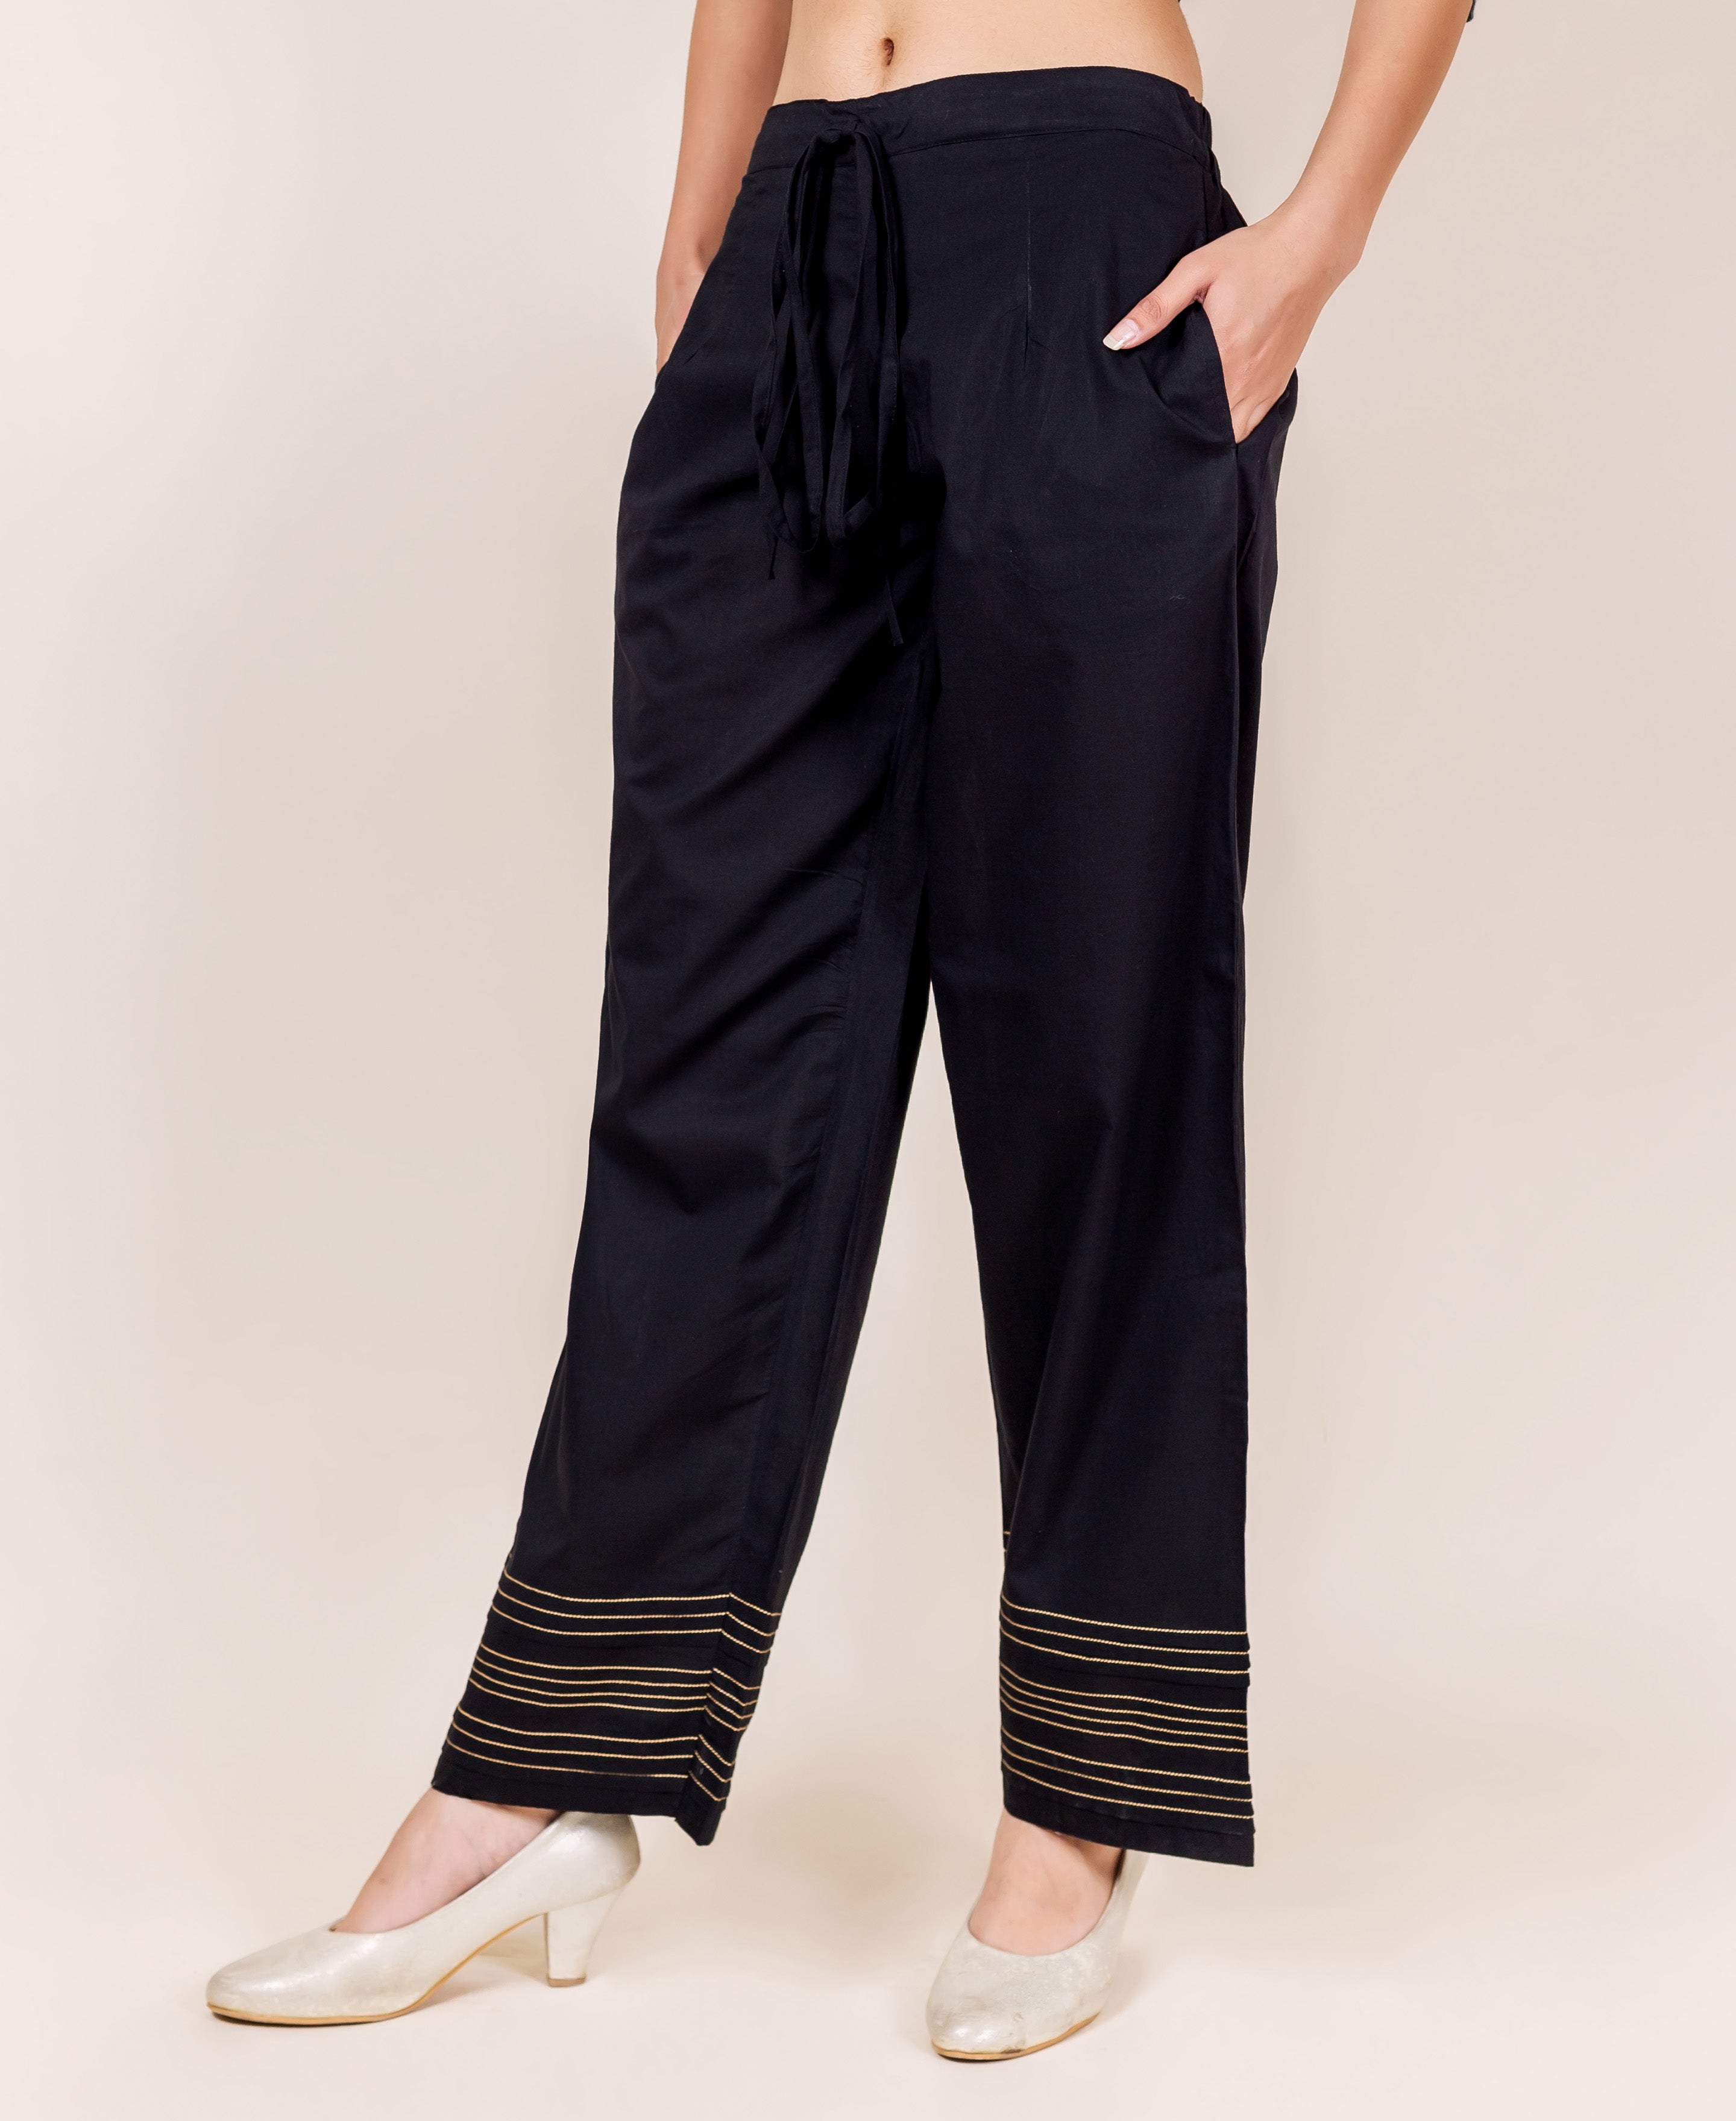 ONLY Trousers and Pants  Buy ONLY Women Solid Black Pants Online  Nykaa  Fashion